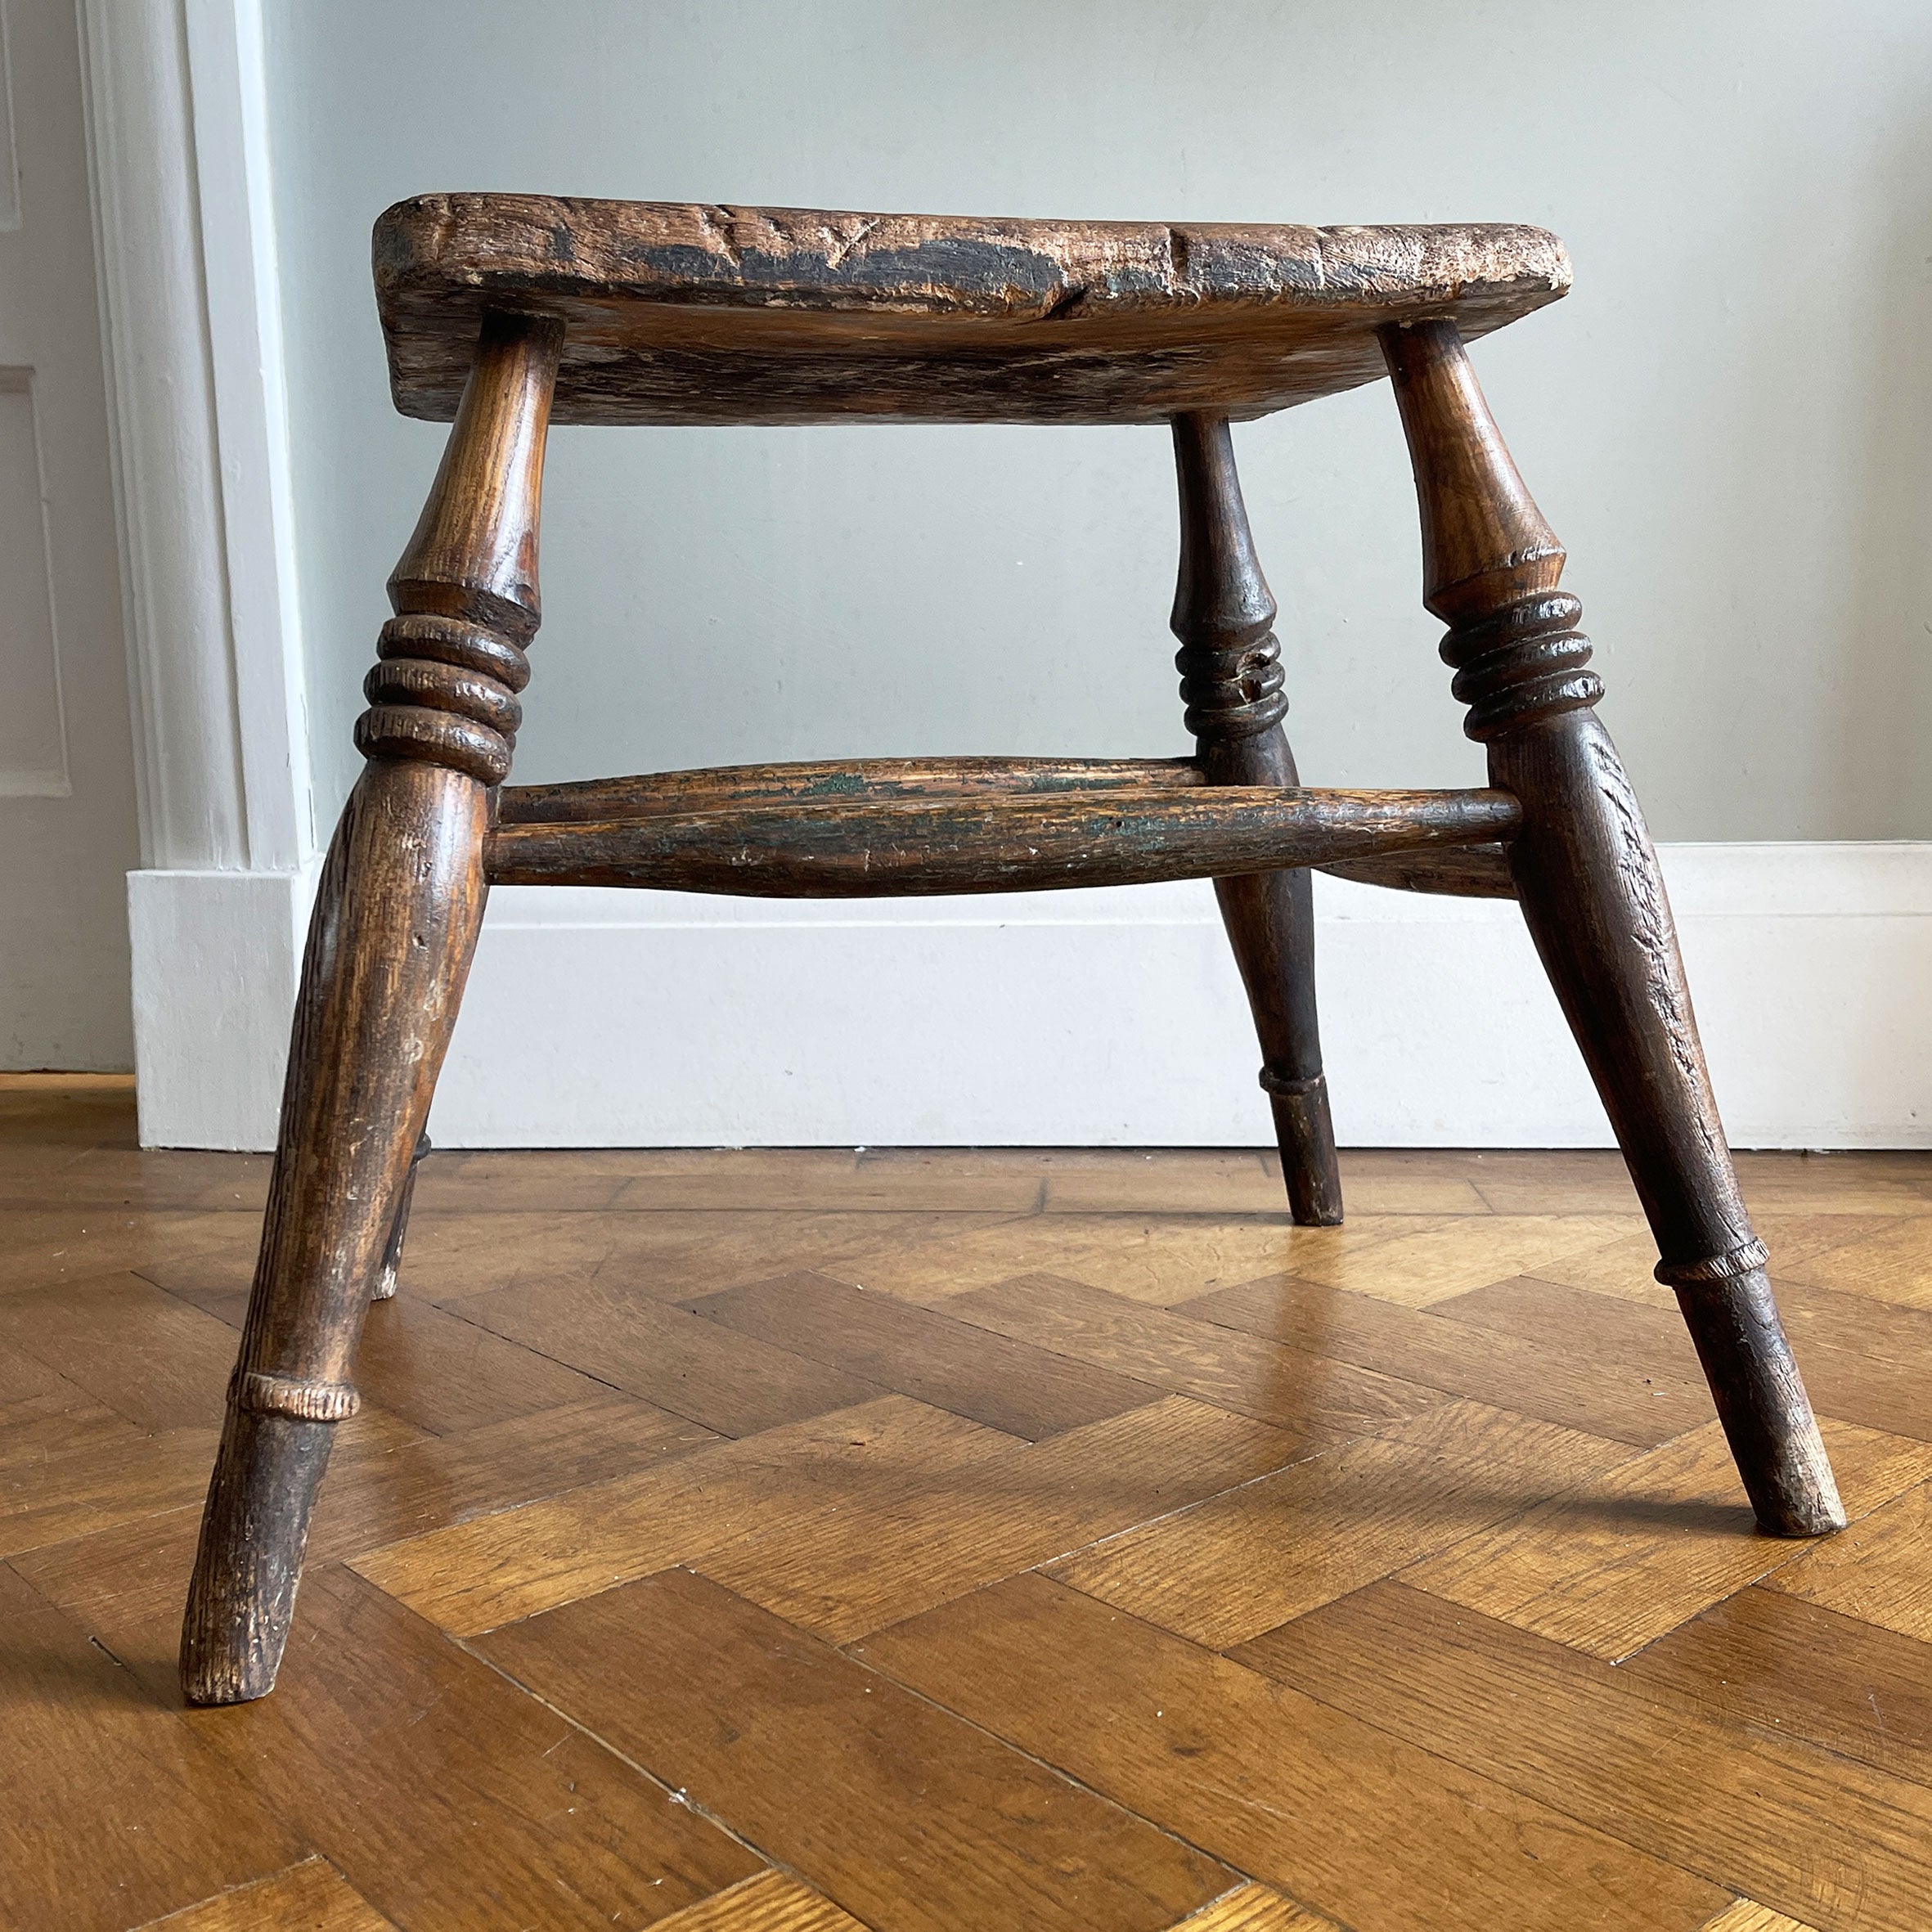 A beautiful time-worn Victorian Elm stool, with marvellous age and wear. Having ring turned legs and a very well worn seat. A great looking stool that would compliment and setting.&nbsp - SHOP NOW - www.intovintage.co.uk